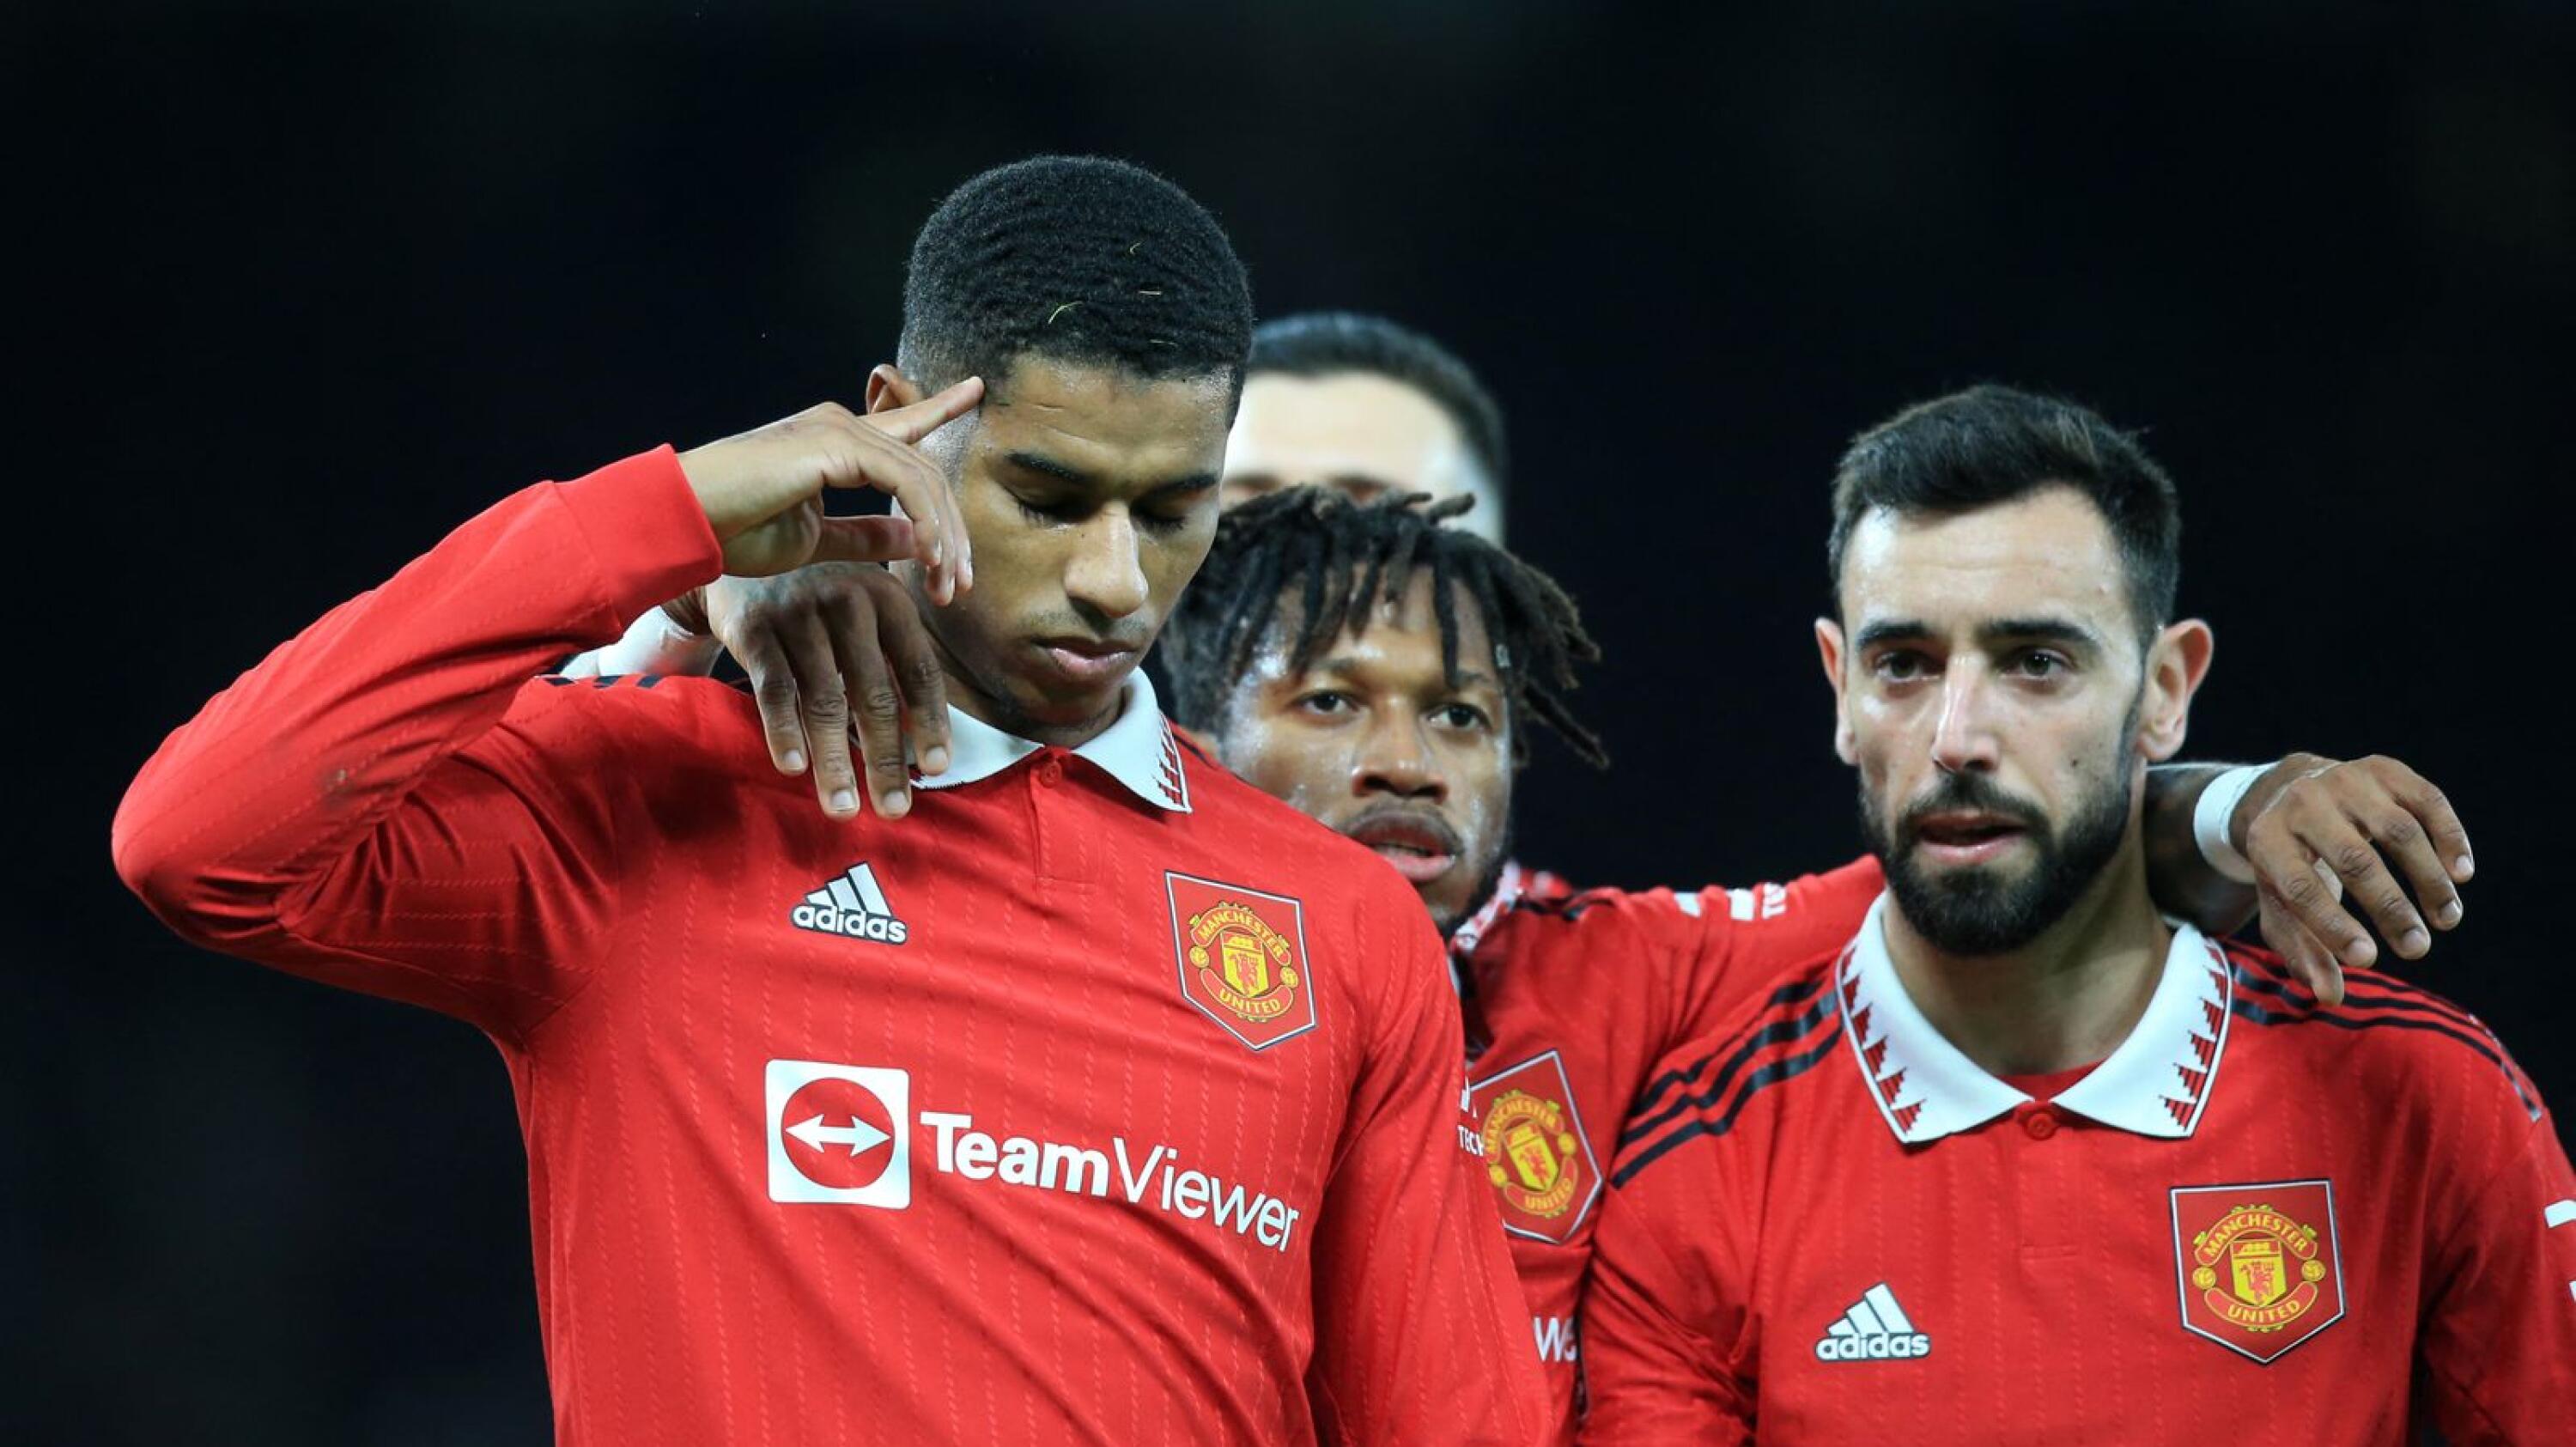 No player in Europe's top five leagues comes close to Marcus Rashford’s 20 goal involvements, with 16 goals and four assists since returning from the World Cup.